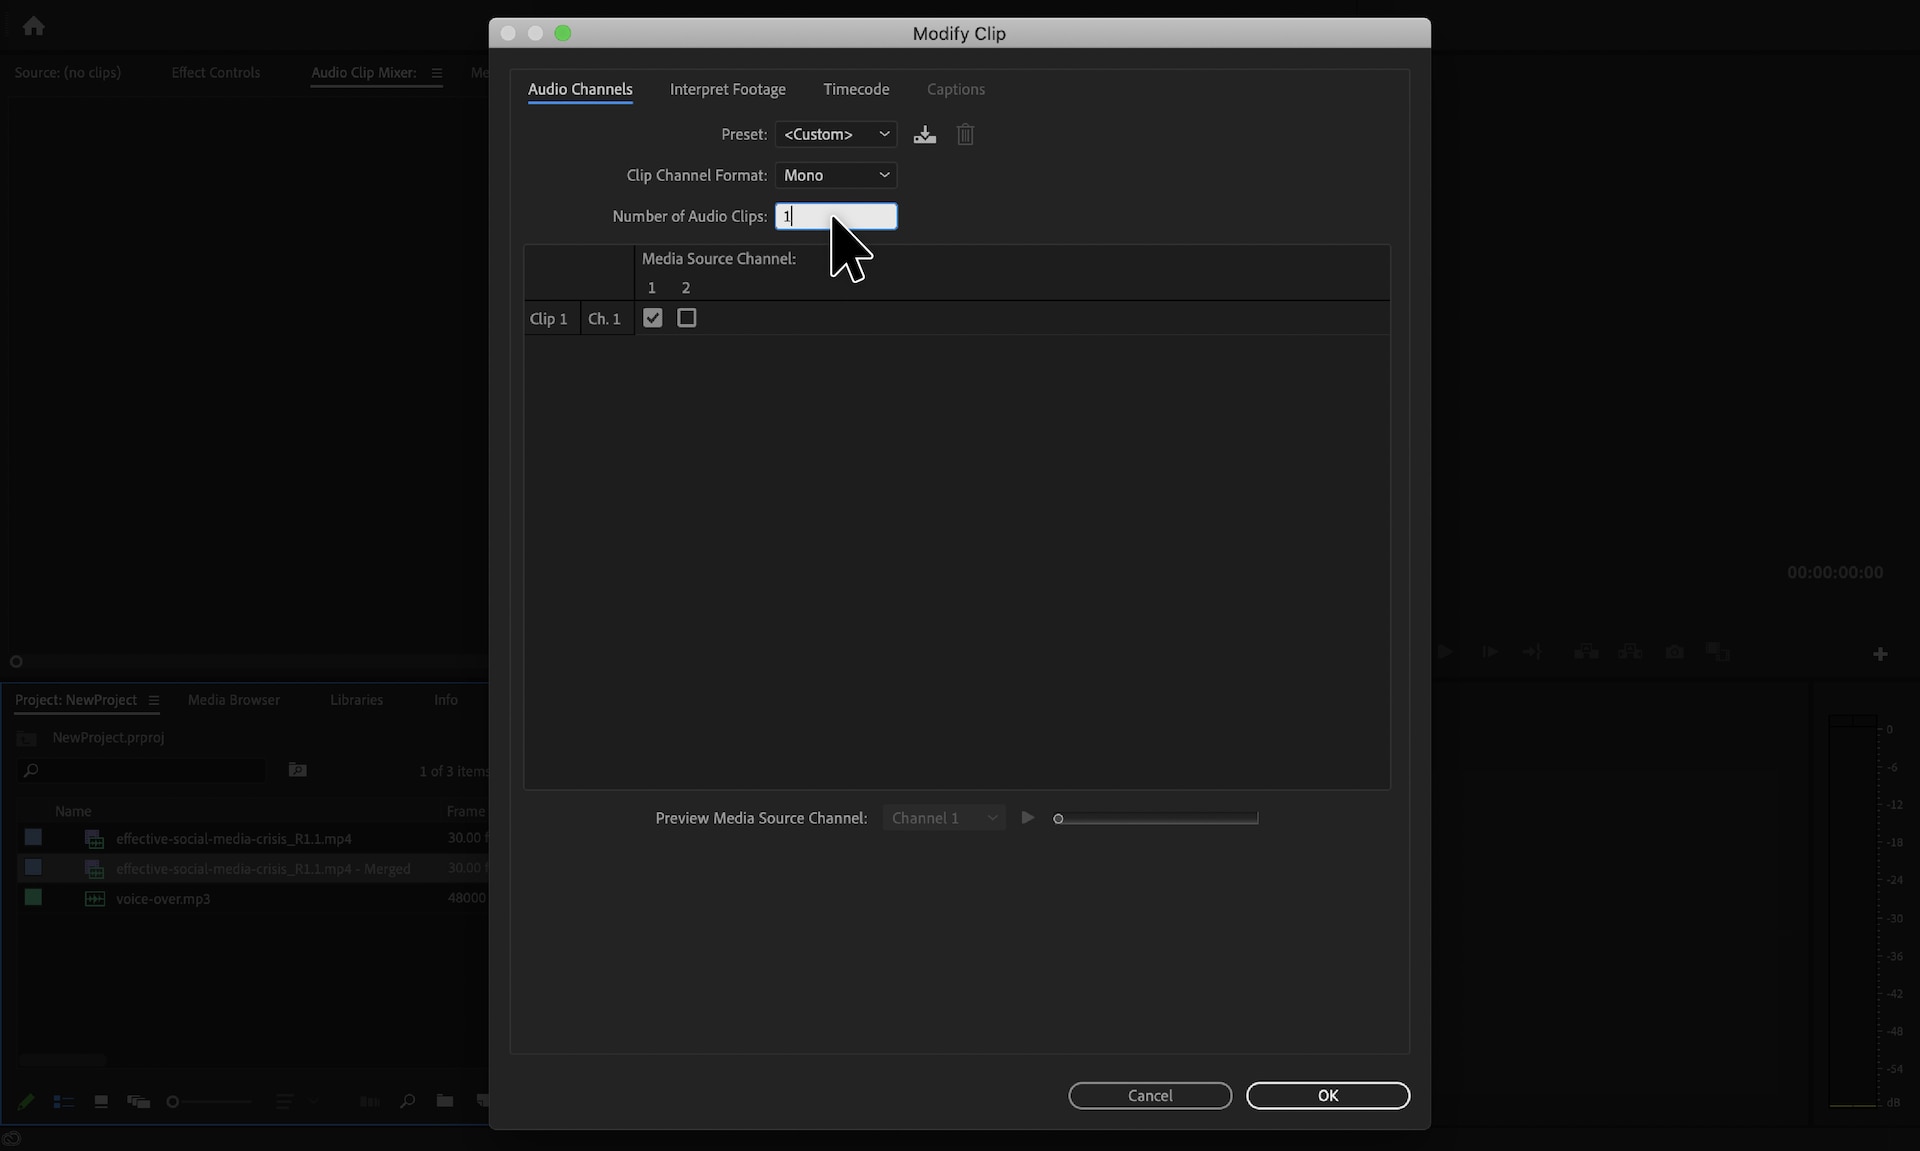 Change the number of audio clips within the Modify Clip dialog box within Adobe Premier Pro.